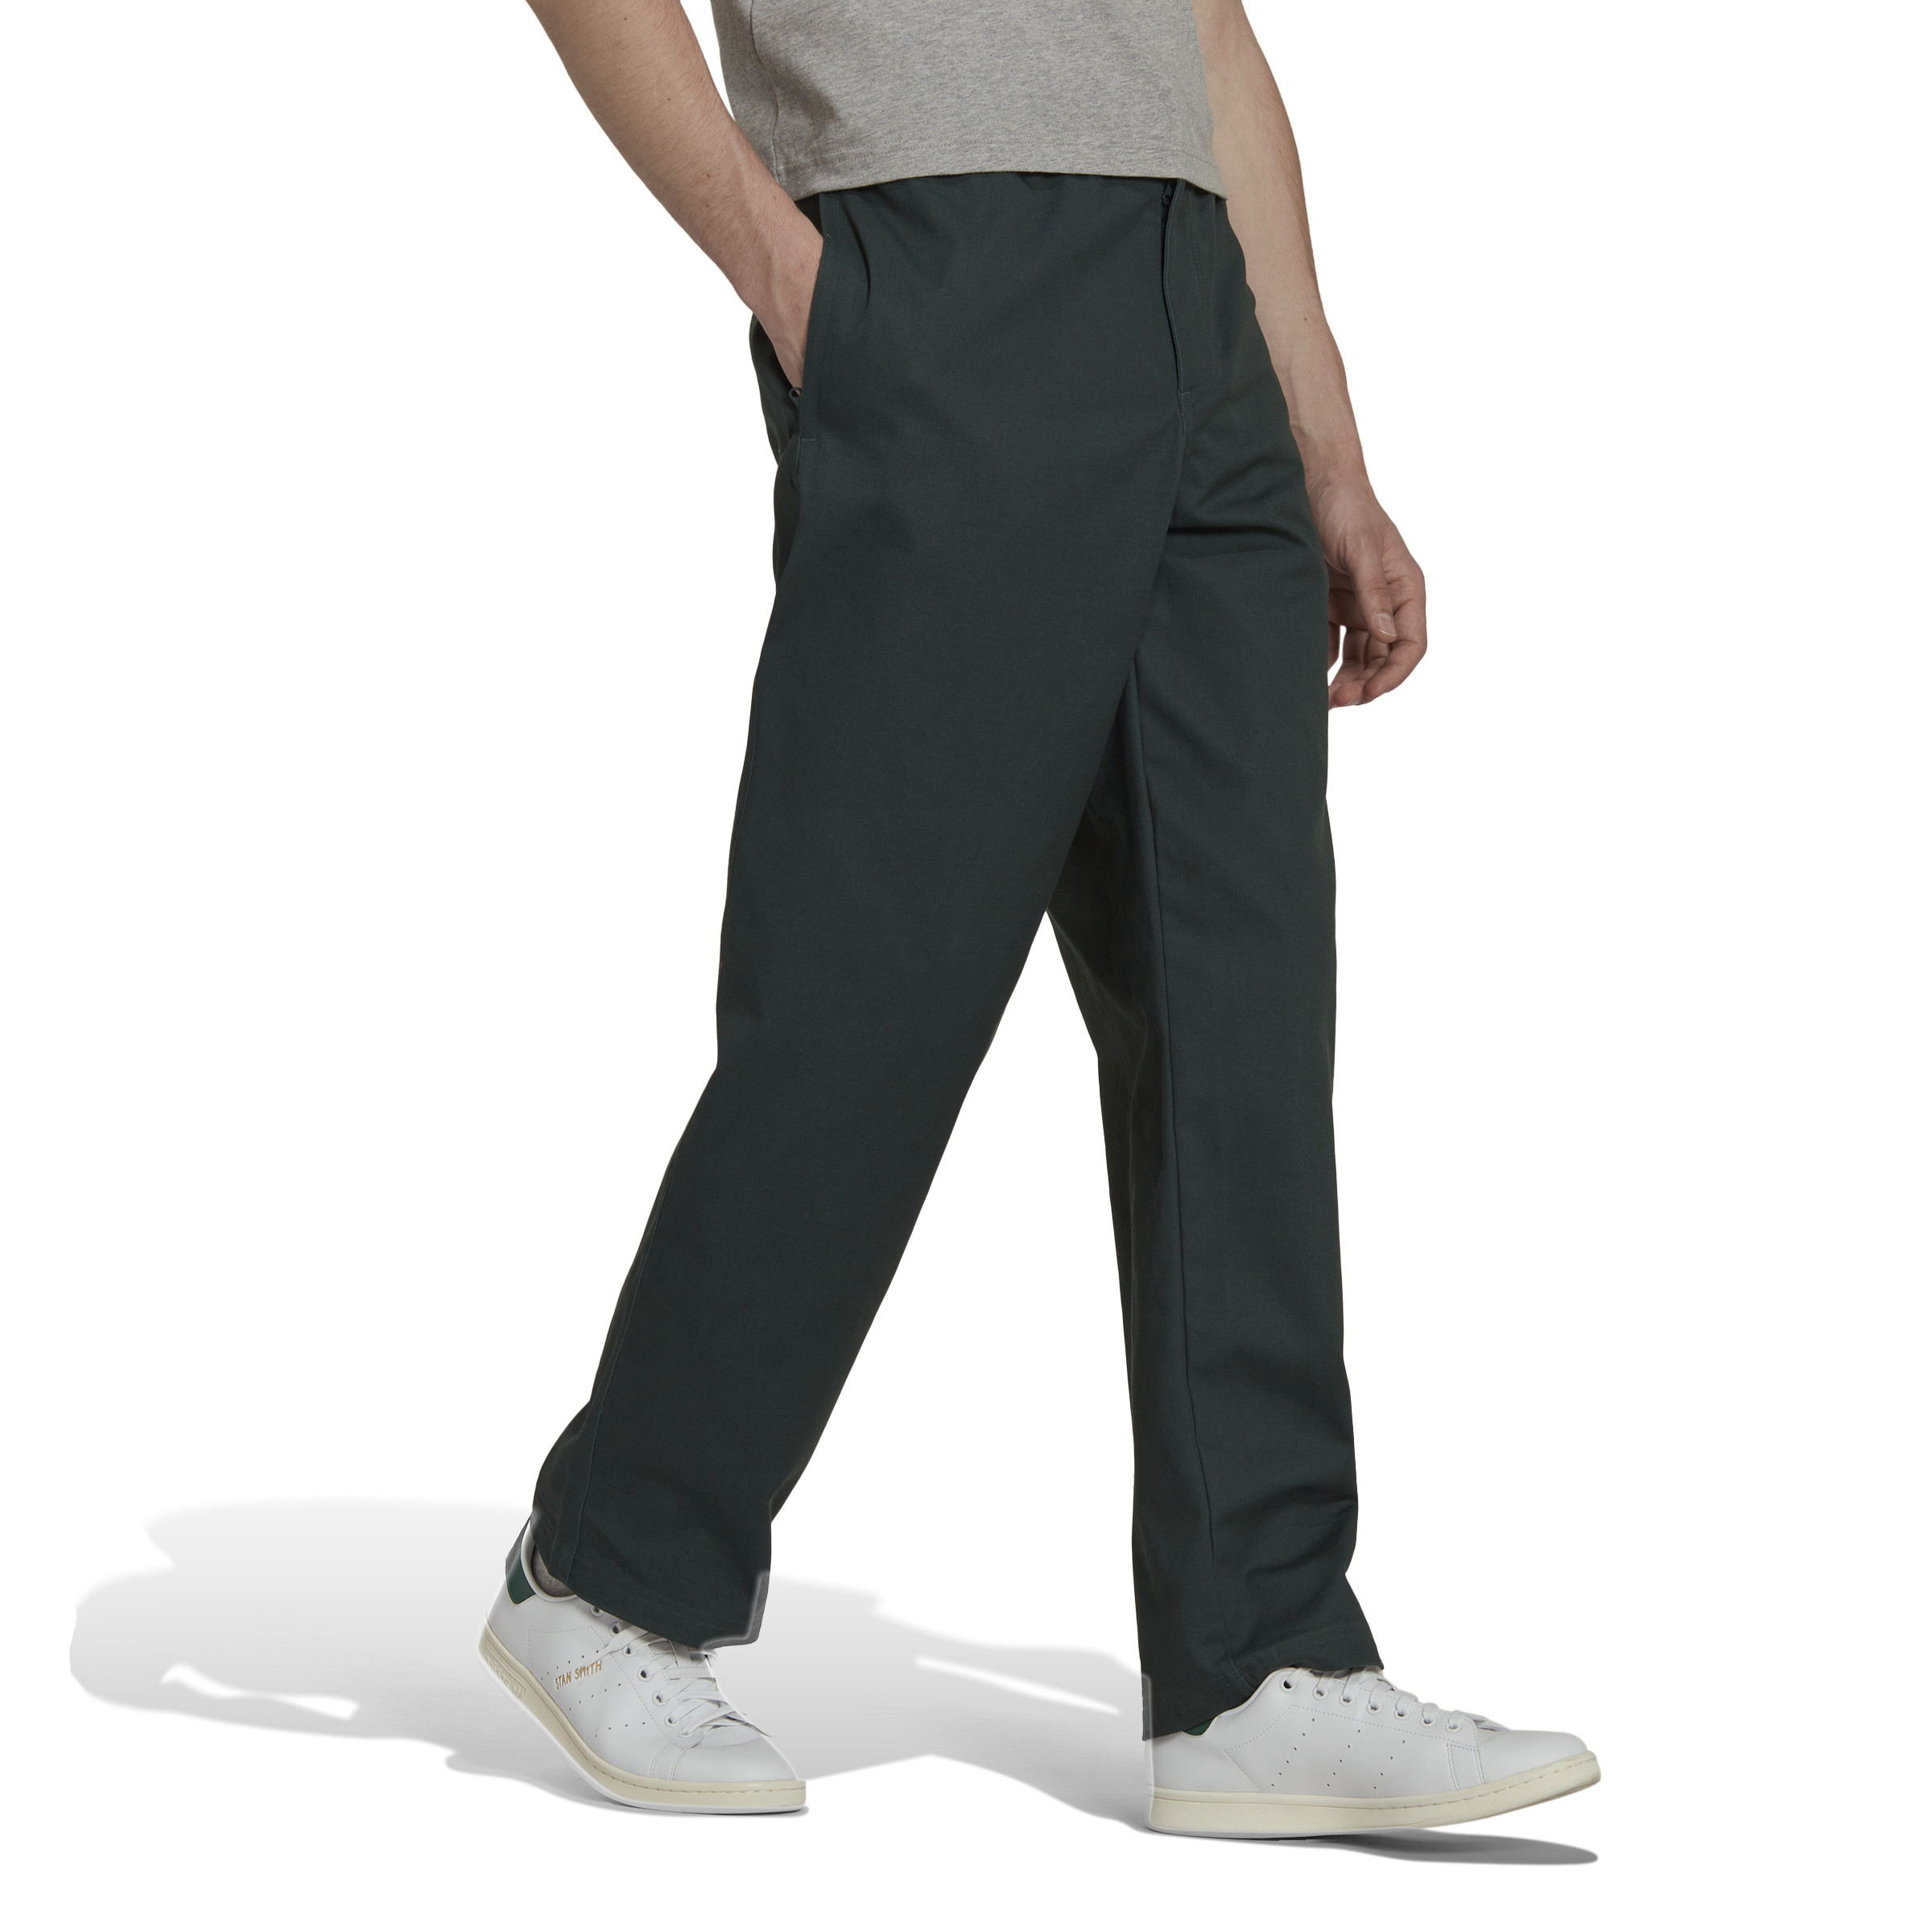 Adidas - Chino adicolor trousers, Dark Green, large image number 2